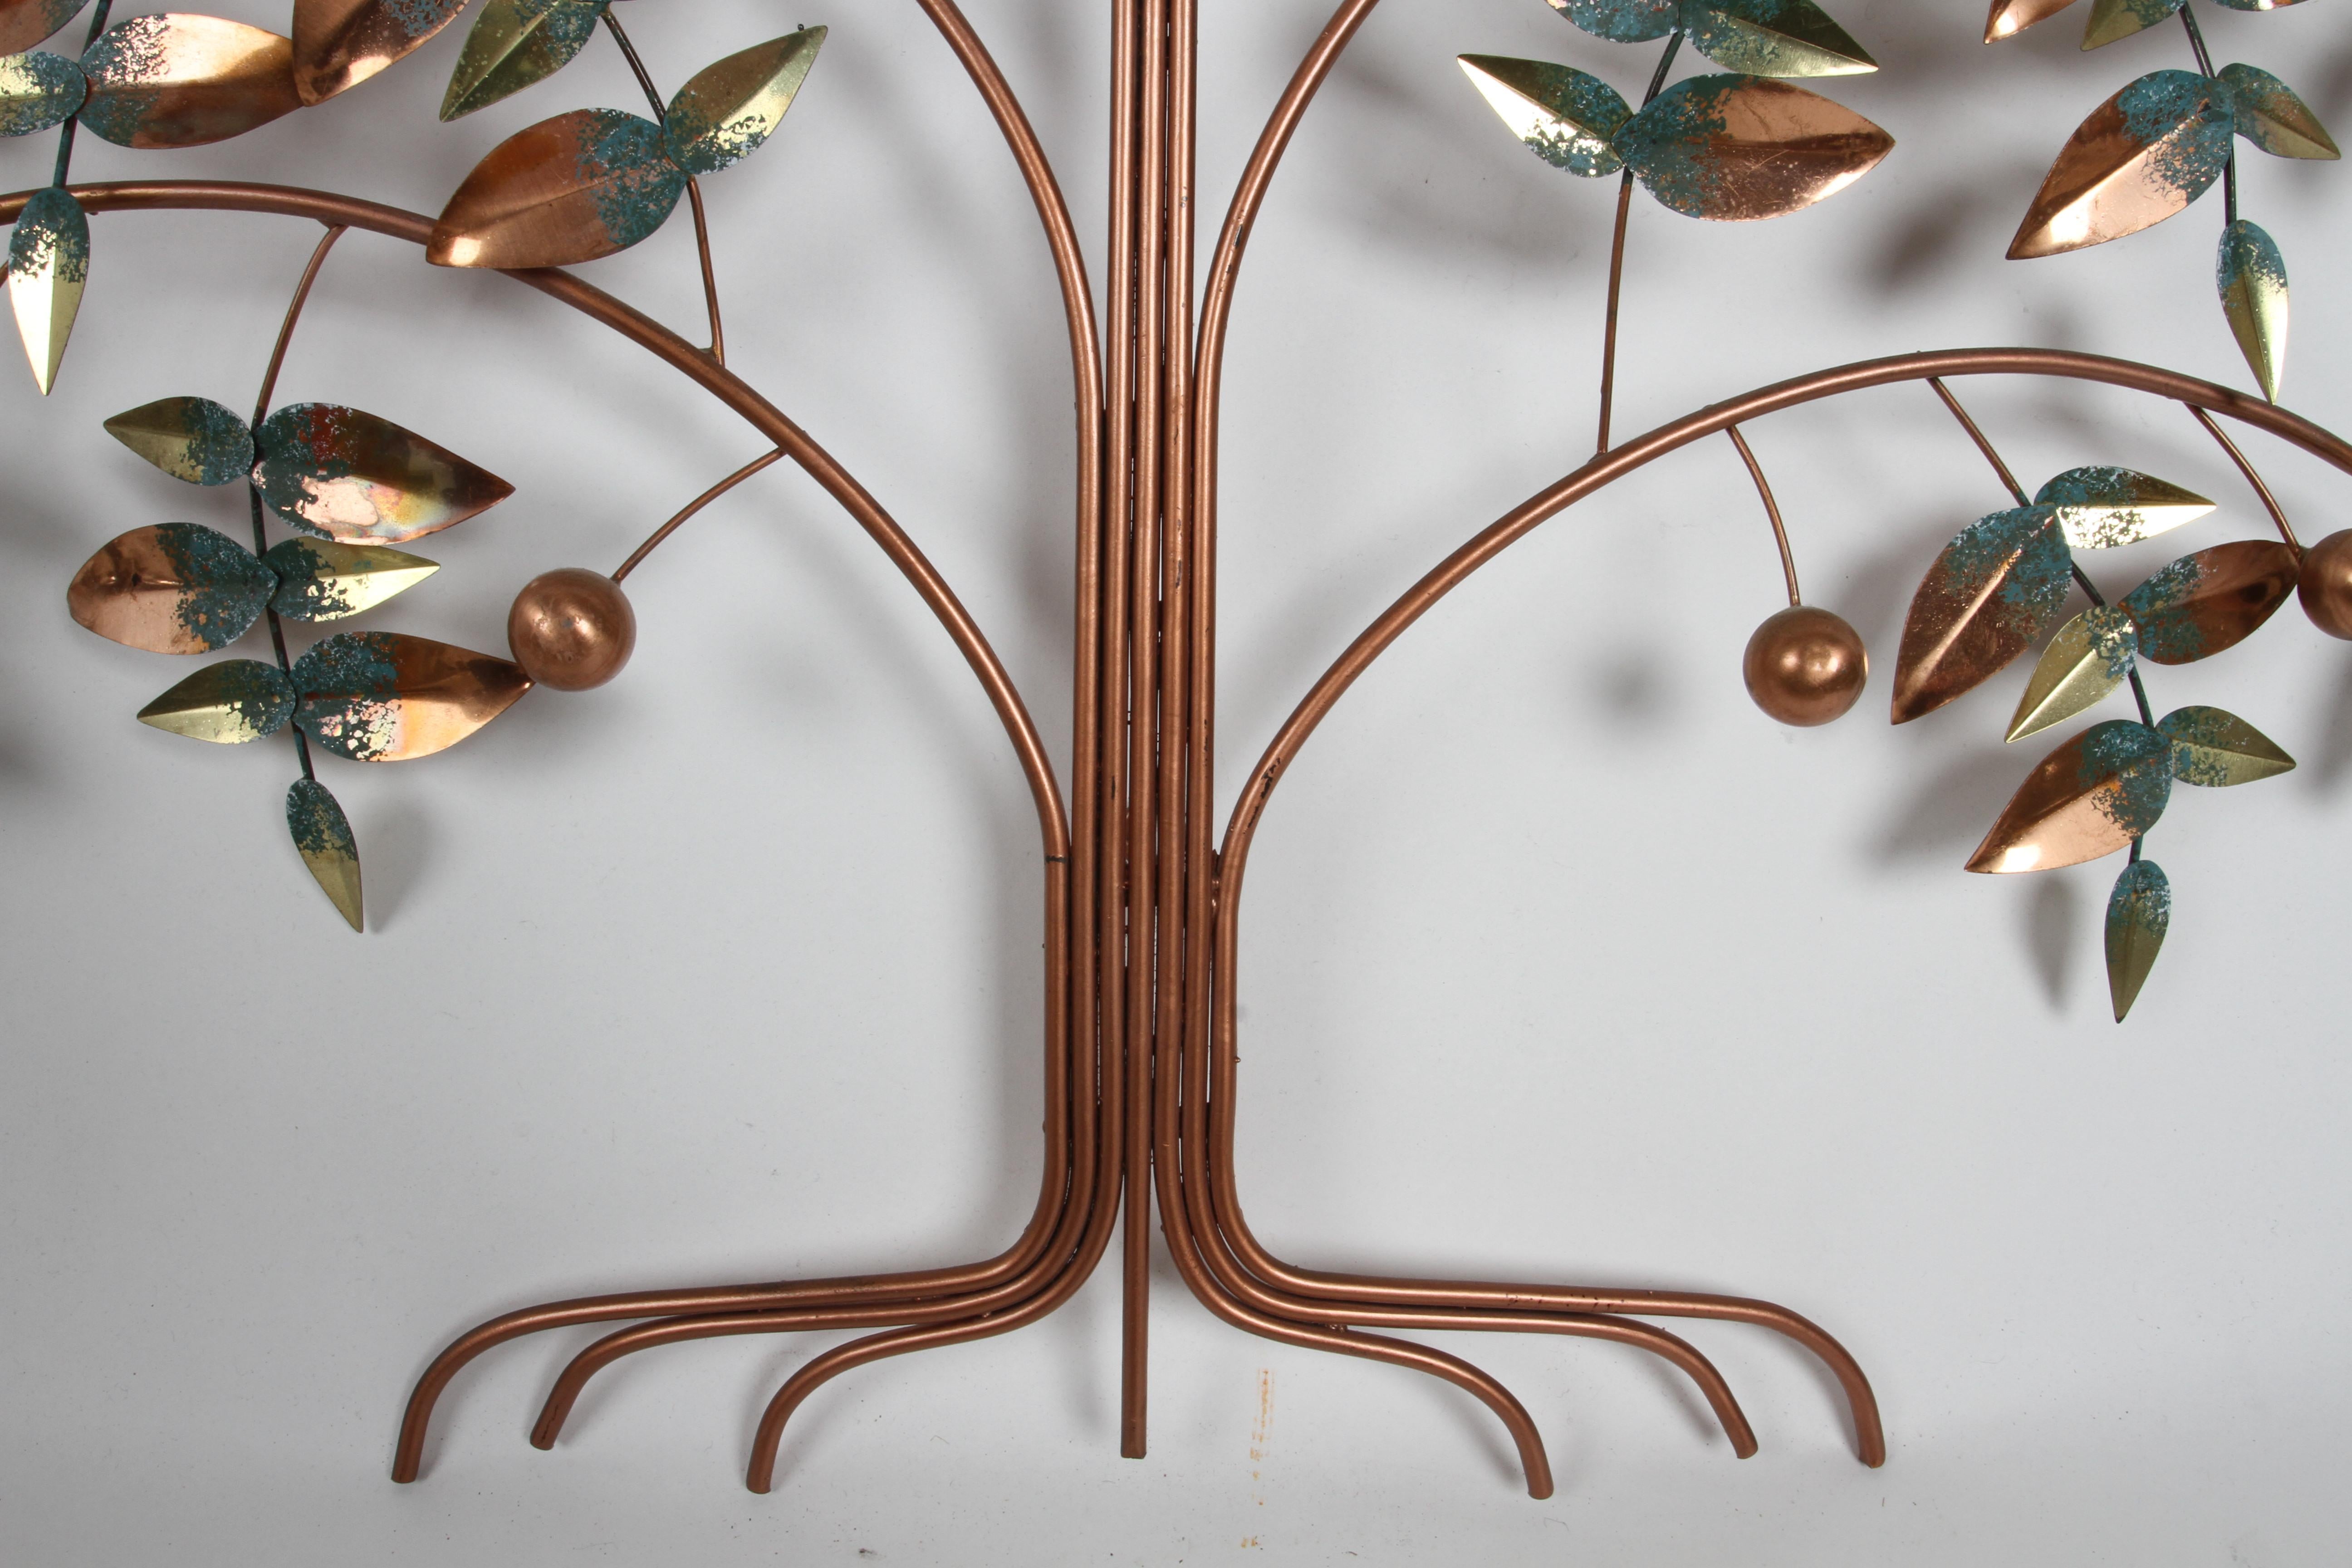 Metal Curtis Jeré Tree of Life in Copper with Green Paint Wall Sculpture - circa 1977